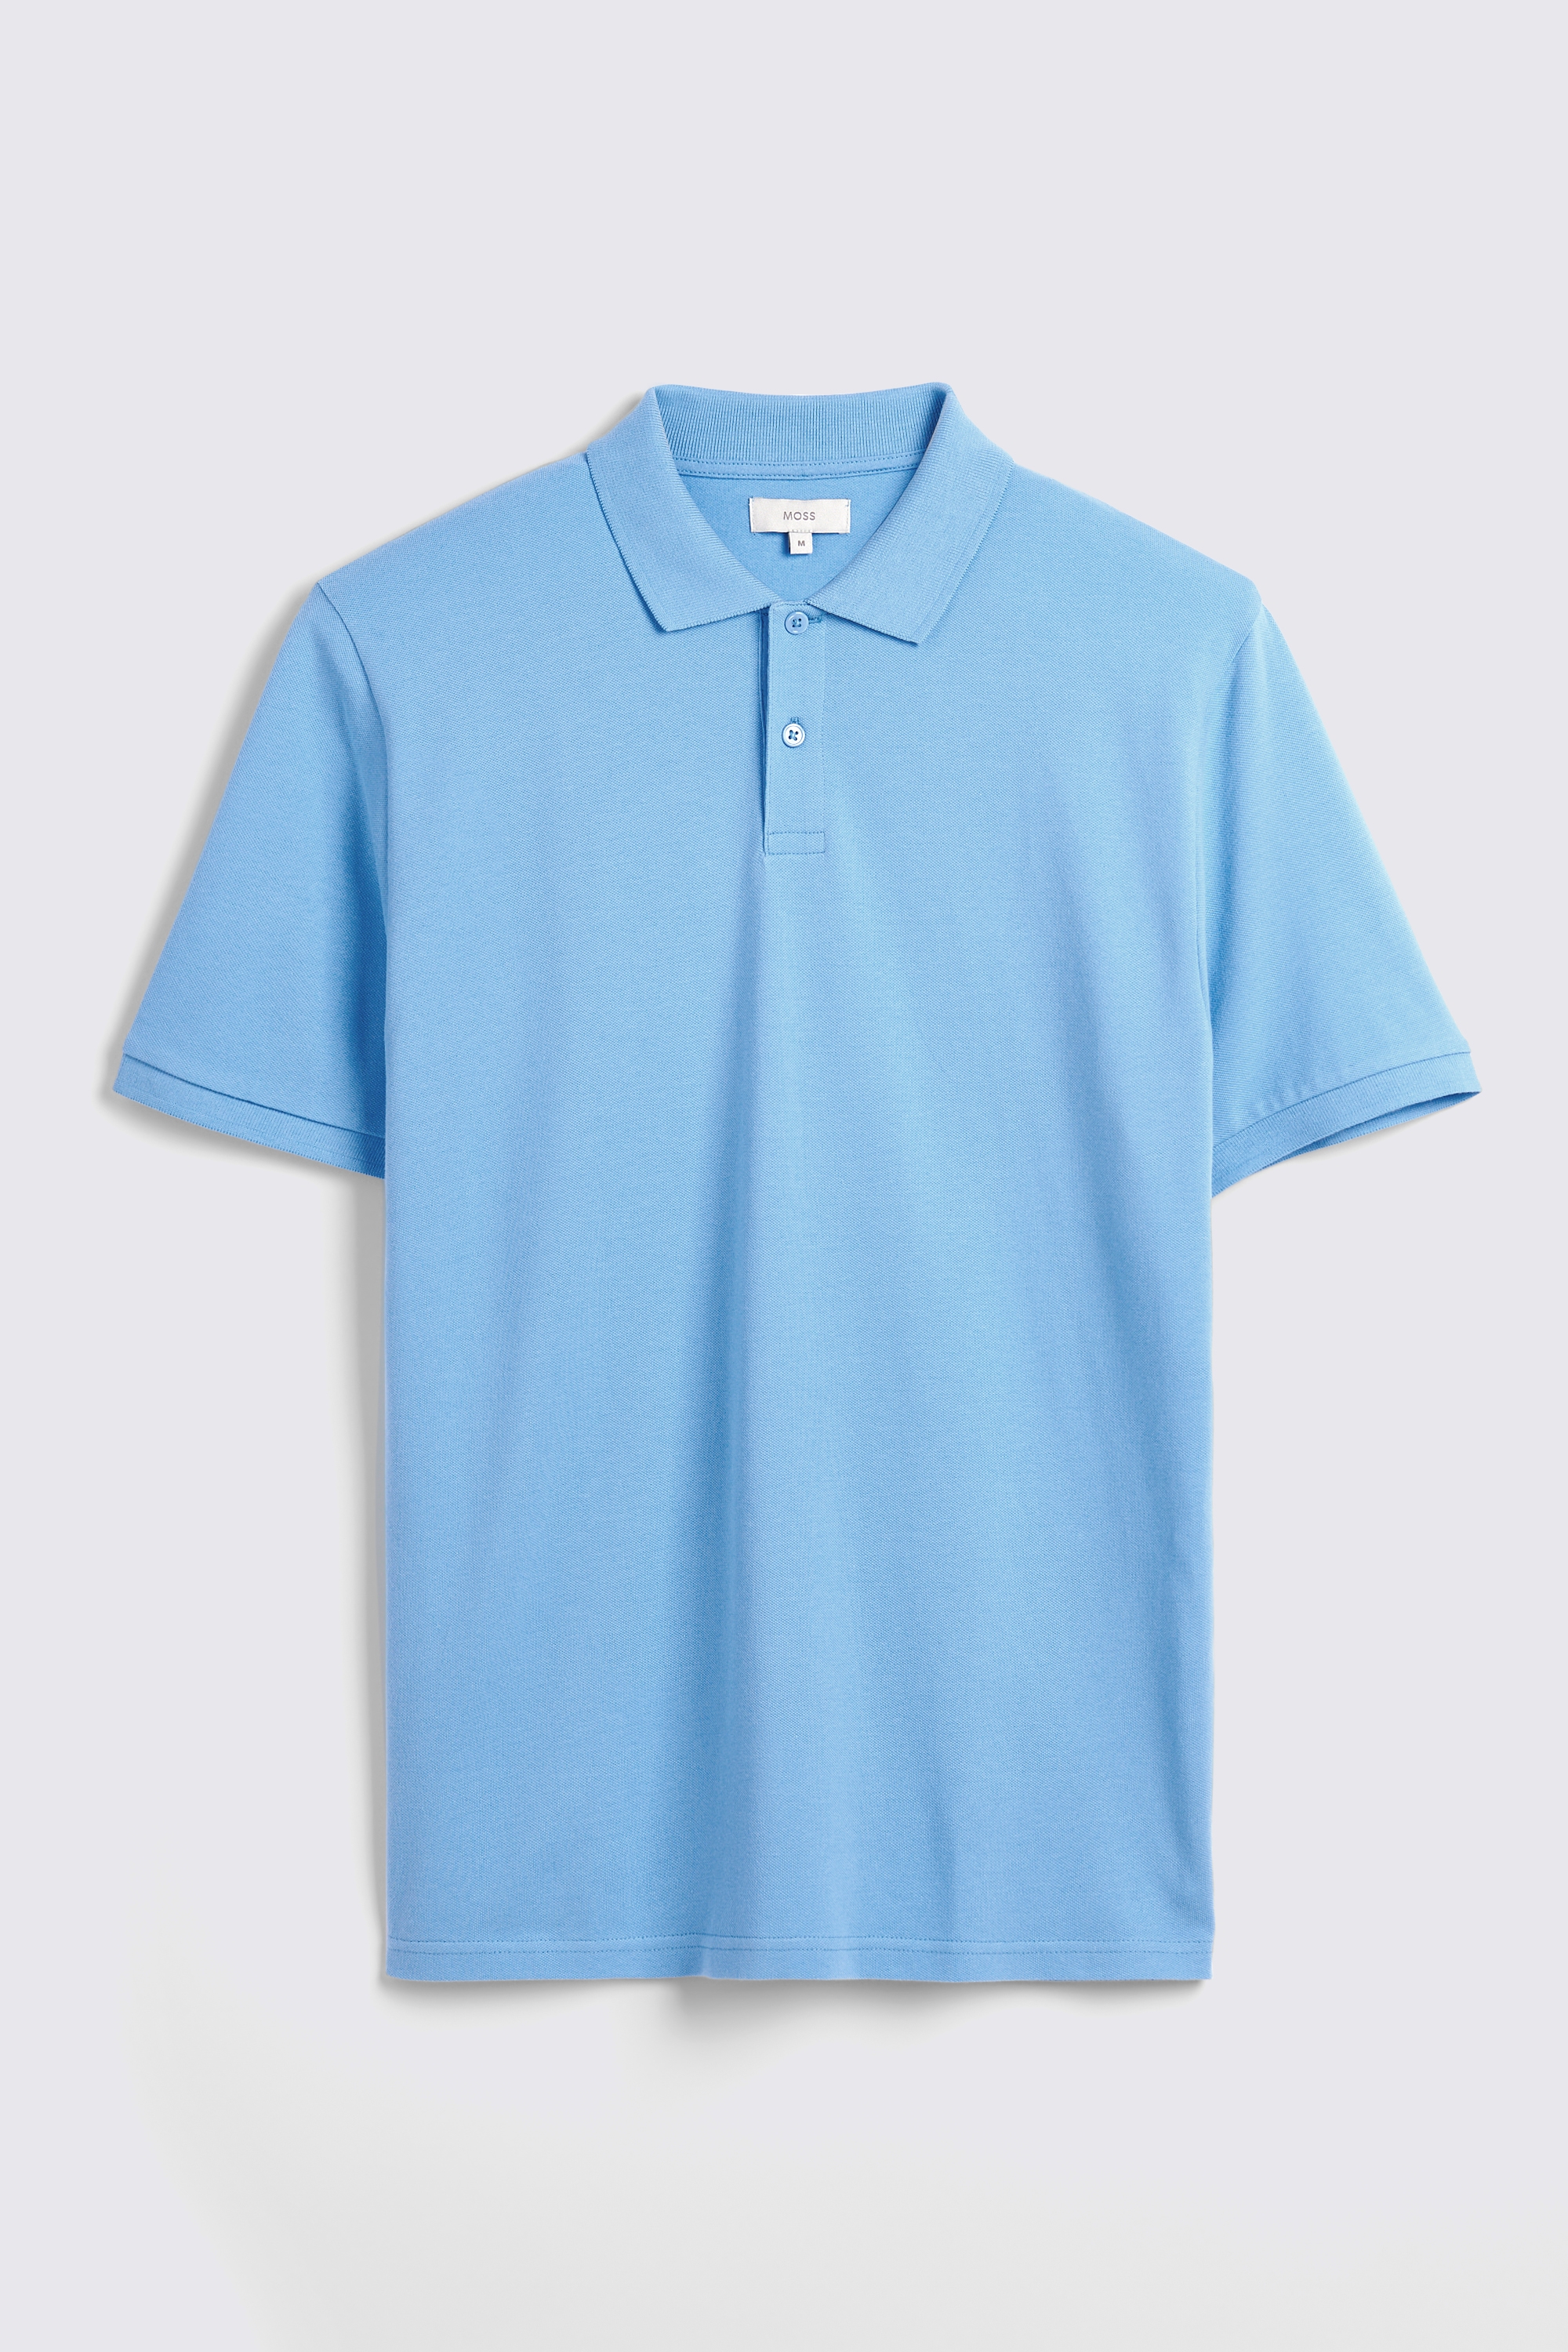 Blue Pique Polo Shirt | Buy Online at Moss